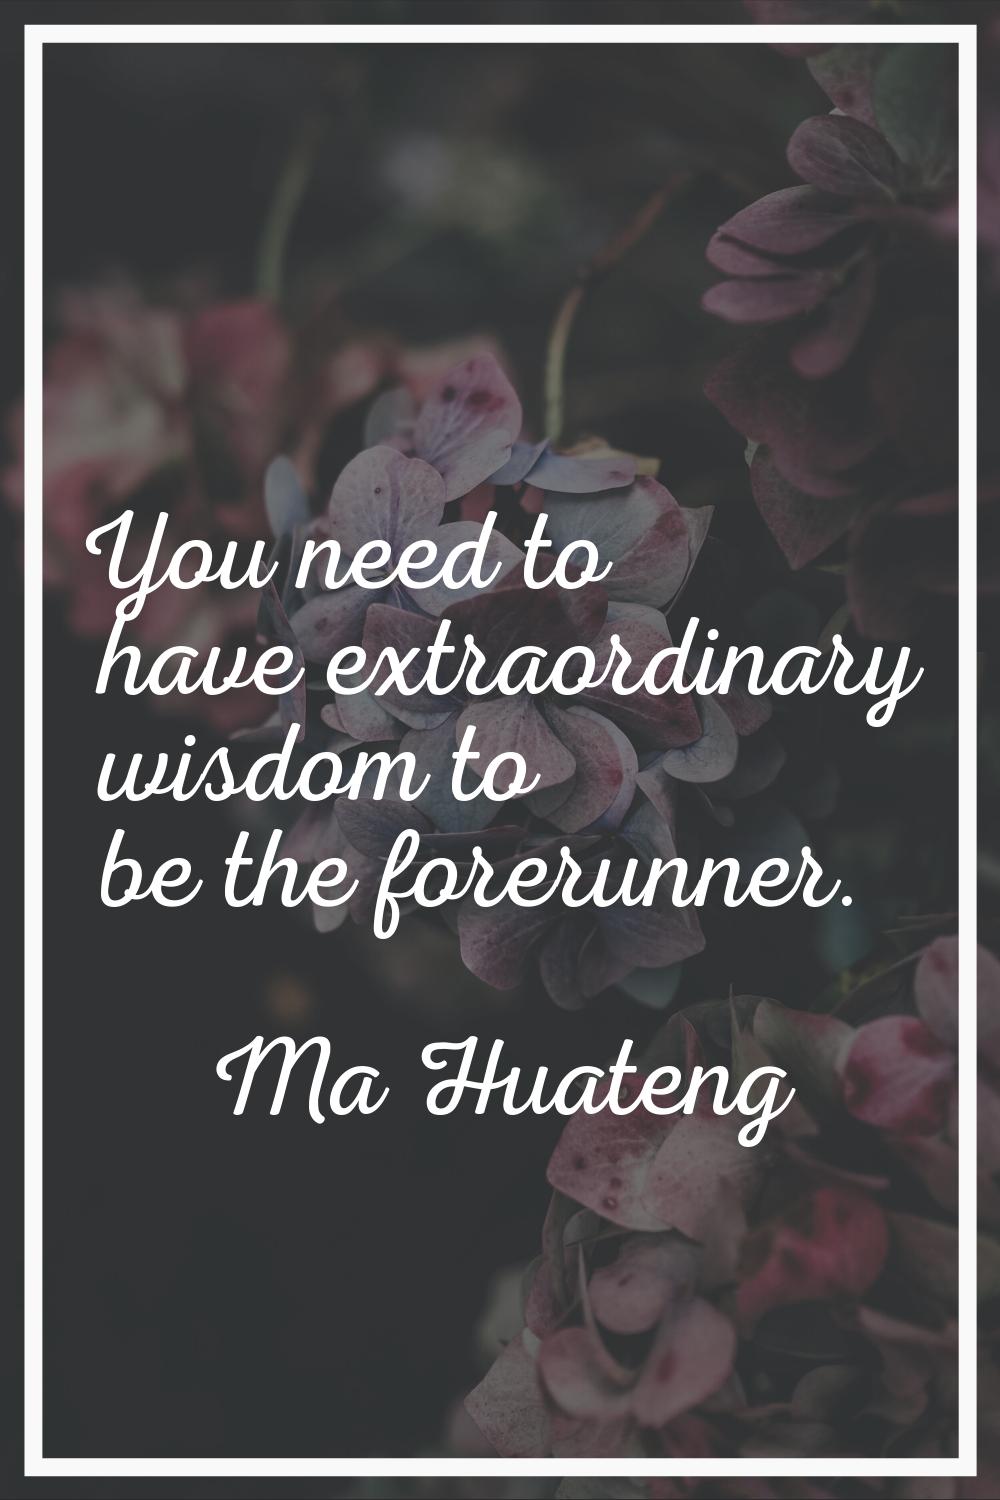 You need to have extraordinary wisdom to be the forerunner.